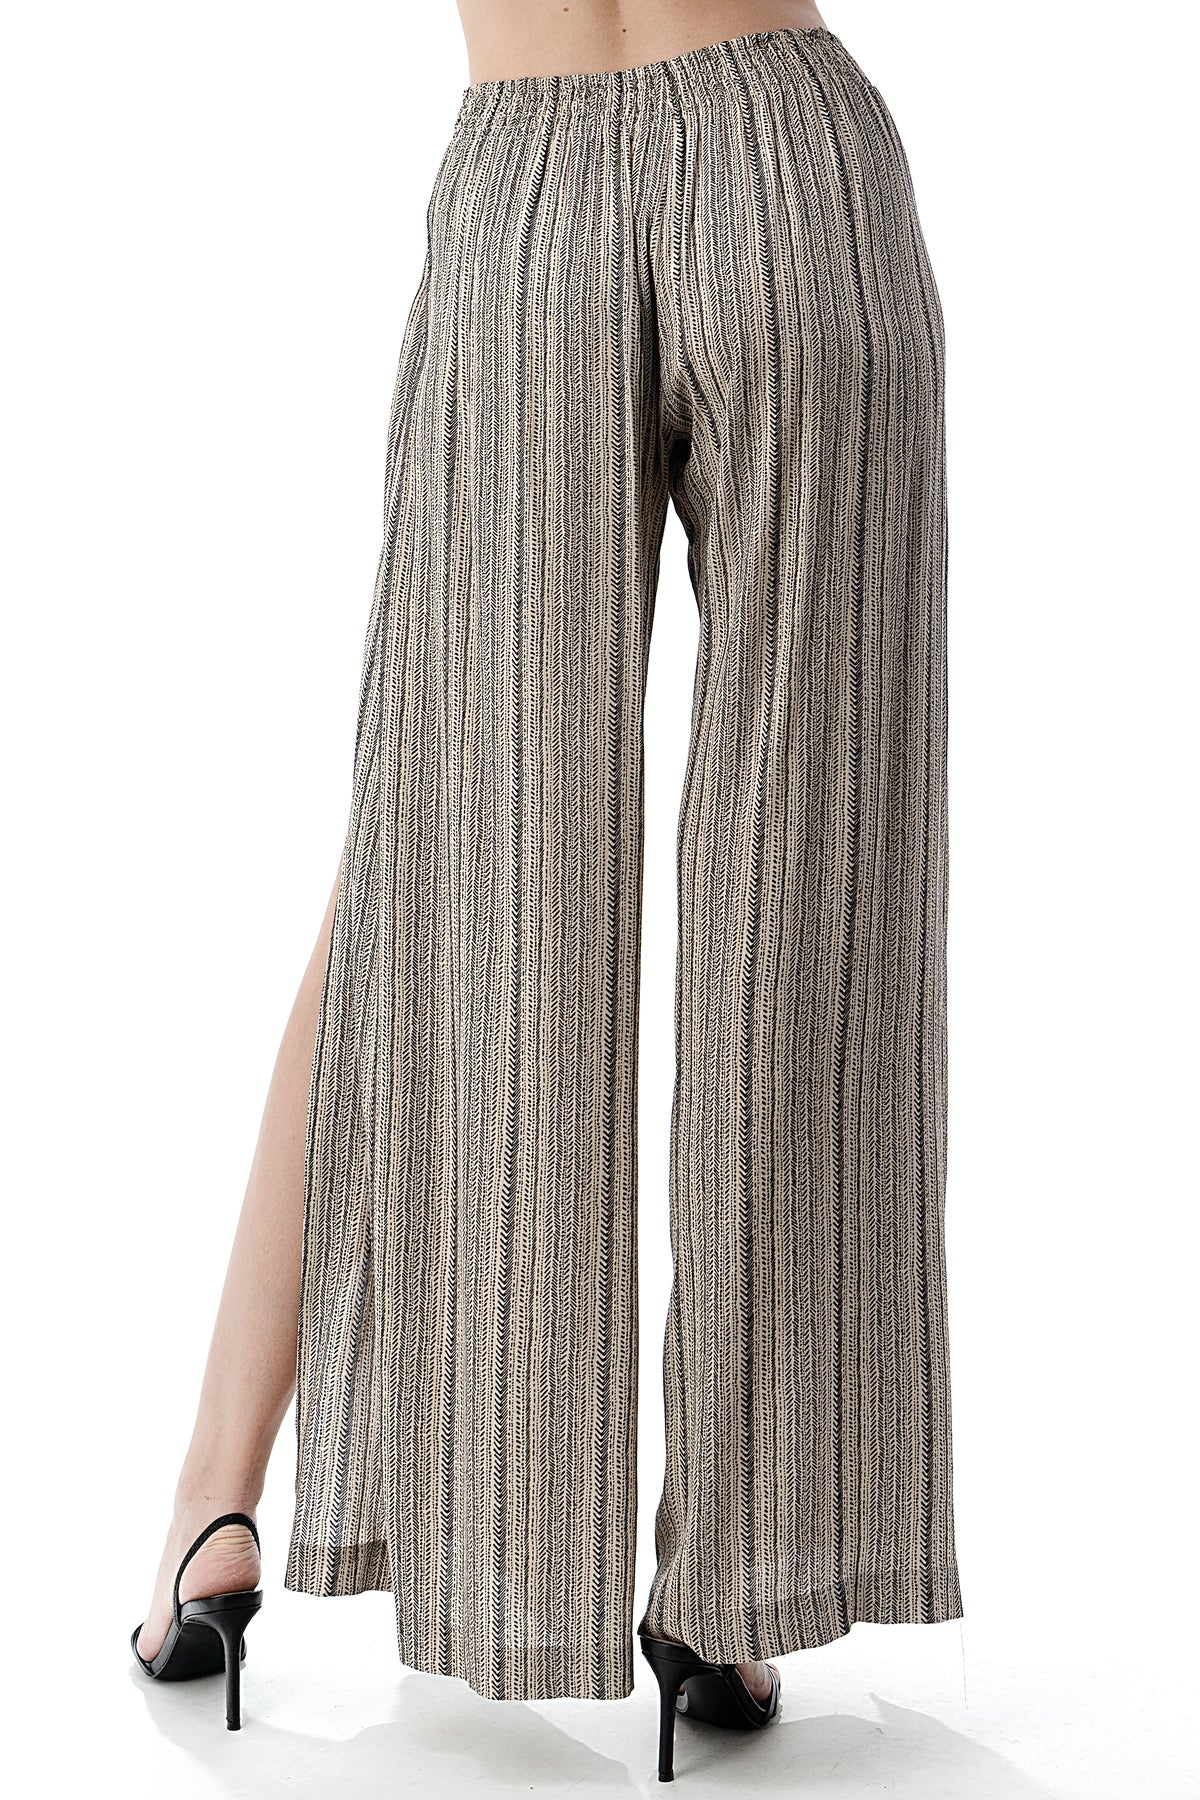 EDGY Land Girl's and Women's High Slit Flowy Layered Casual CroPPEd Palazzo Pant